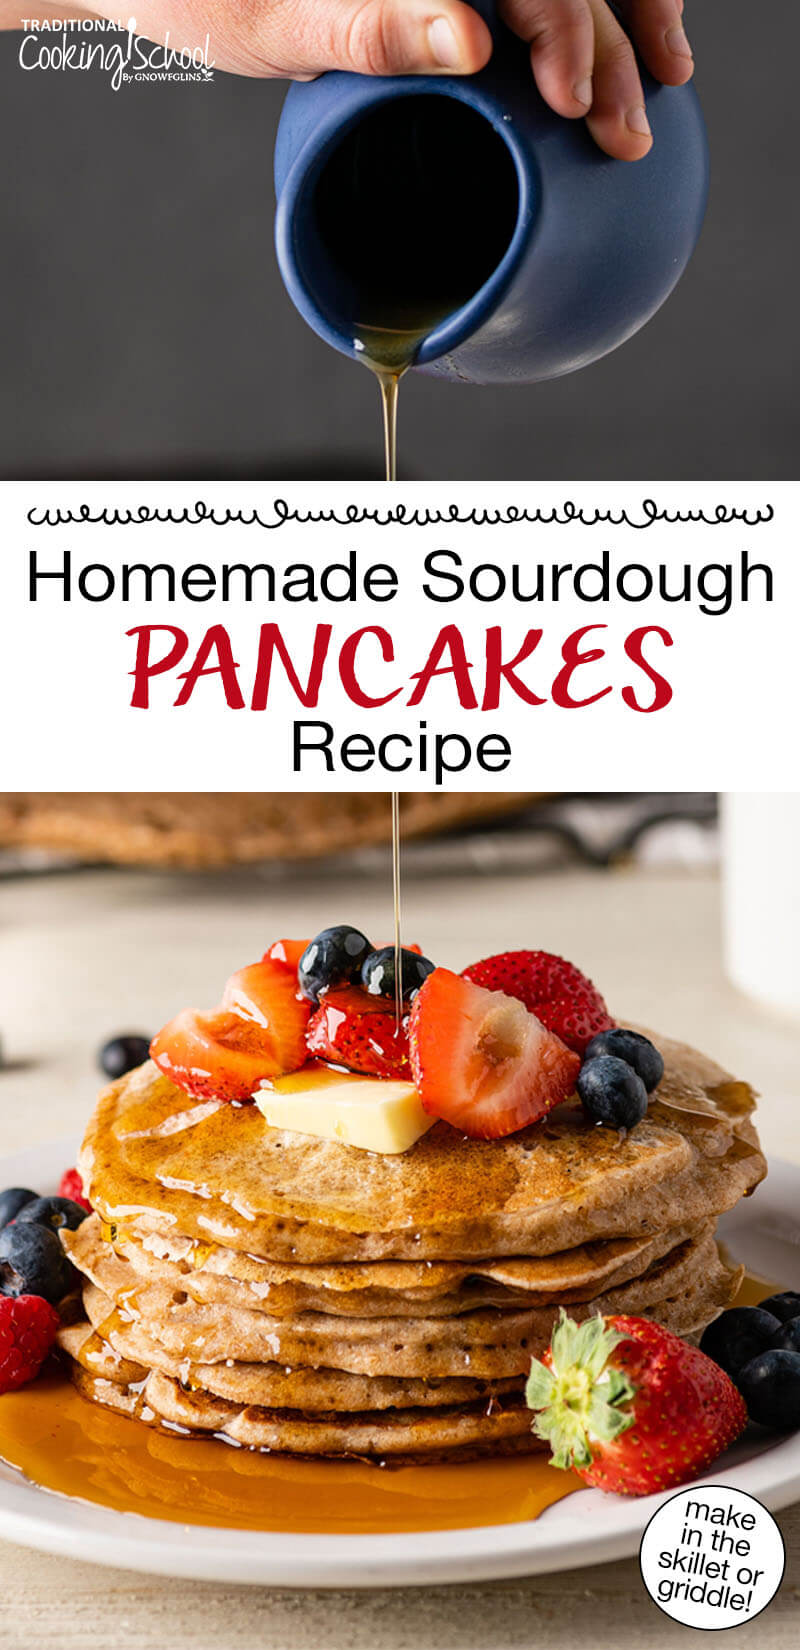 Stack of sourdough pancakes on a plate topped with fresh fruit, butter, and being drizzled with syrup. Text overlay says: "Homemade Sourdough Pancakes Recipe (make in the skillet or griddle!)"